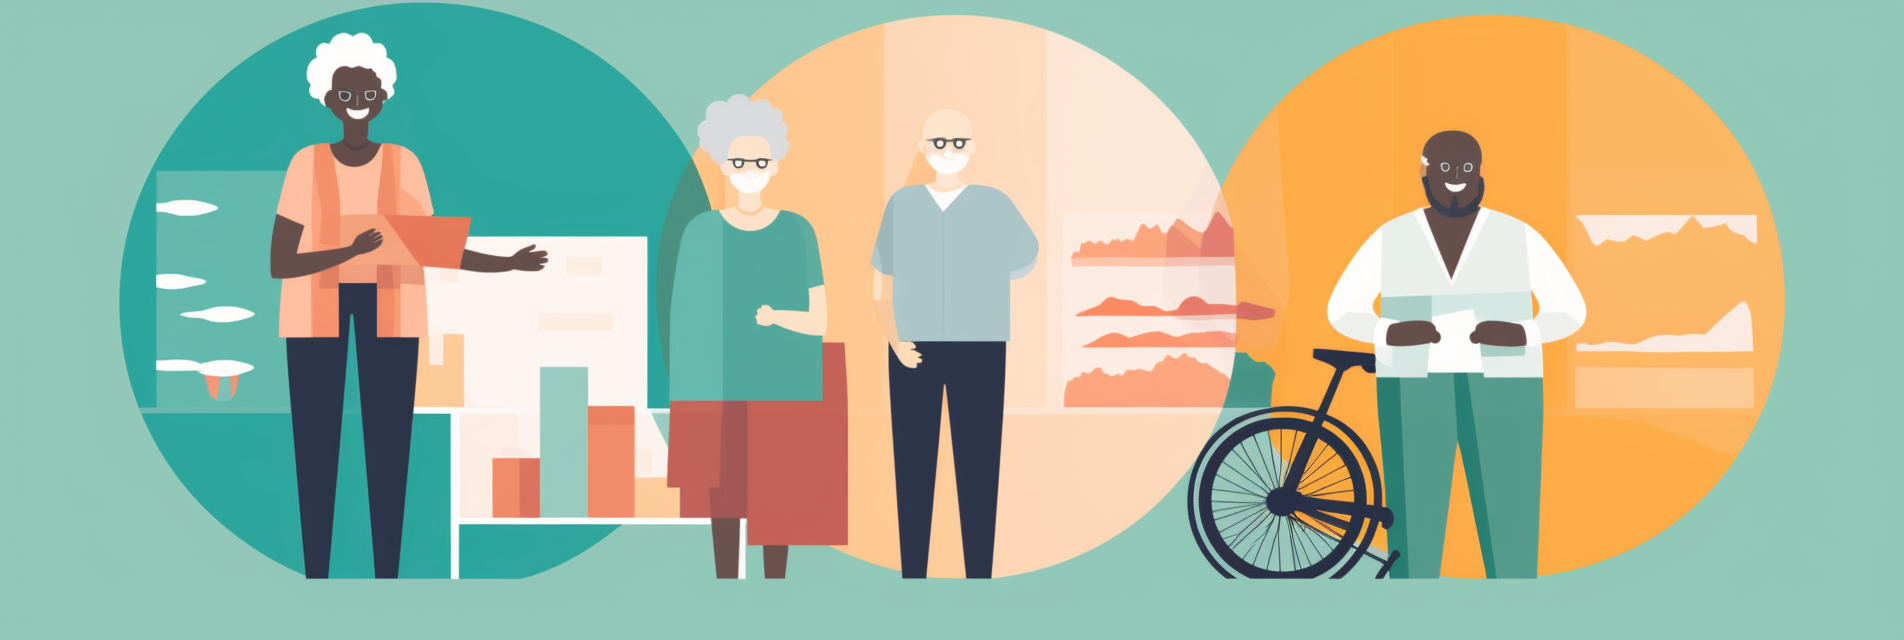 Marketing strategies for diverse senior care options